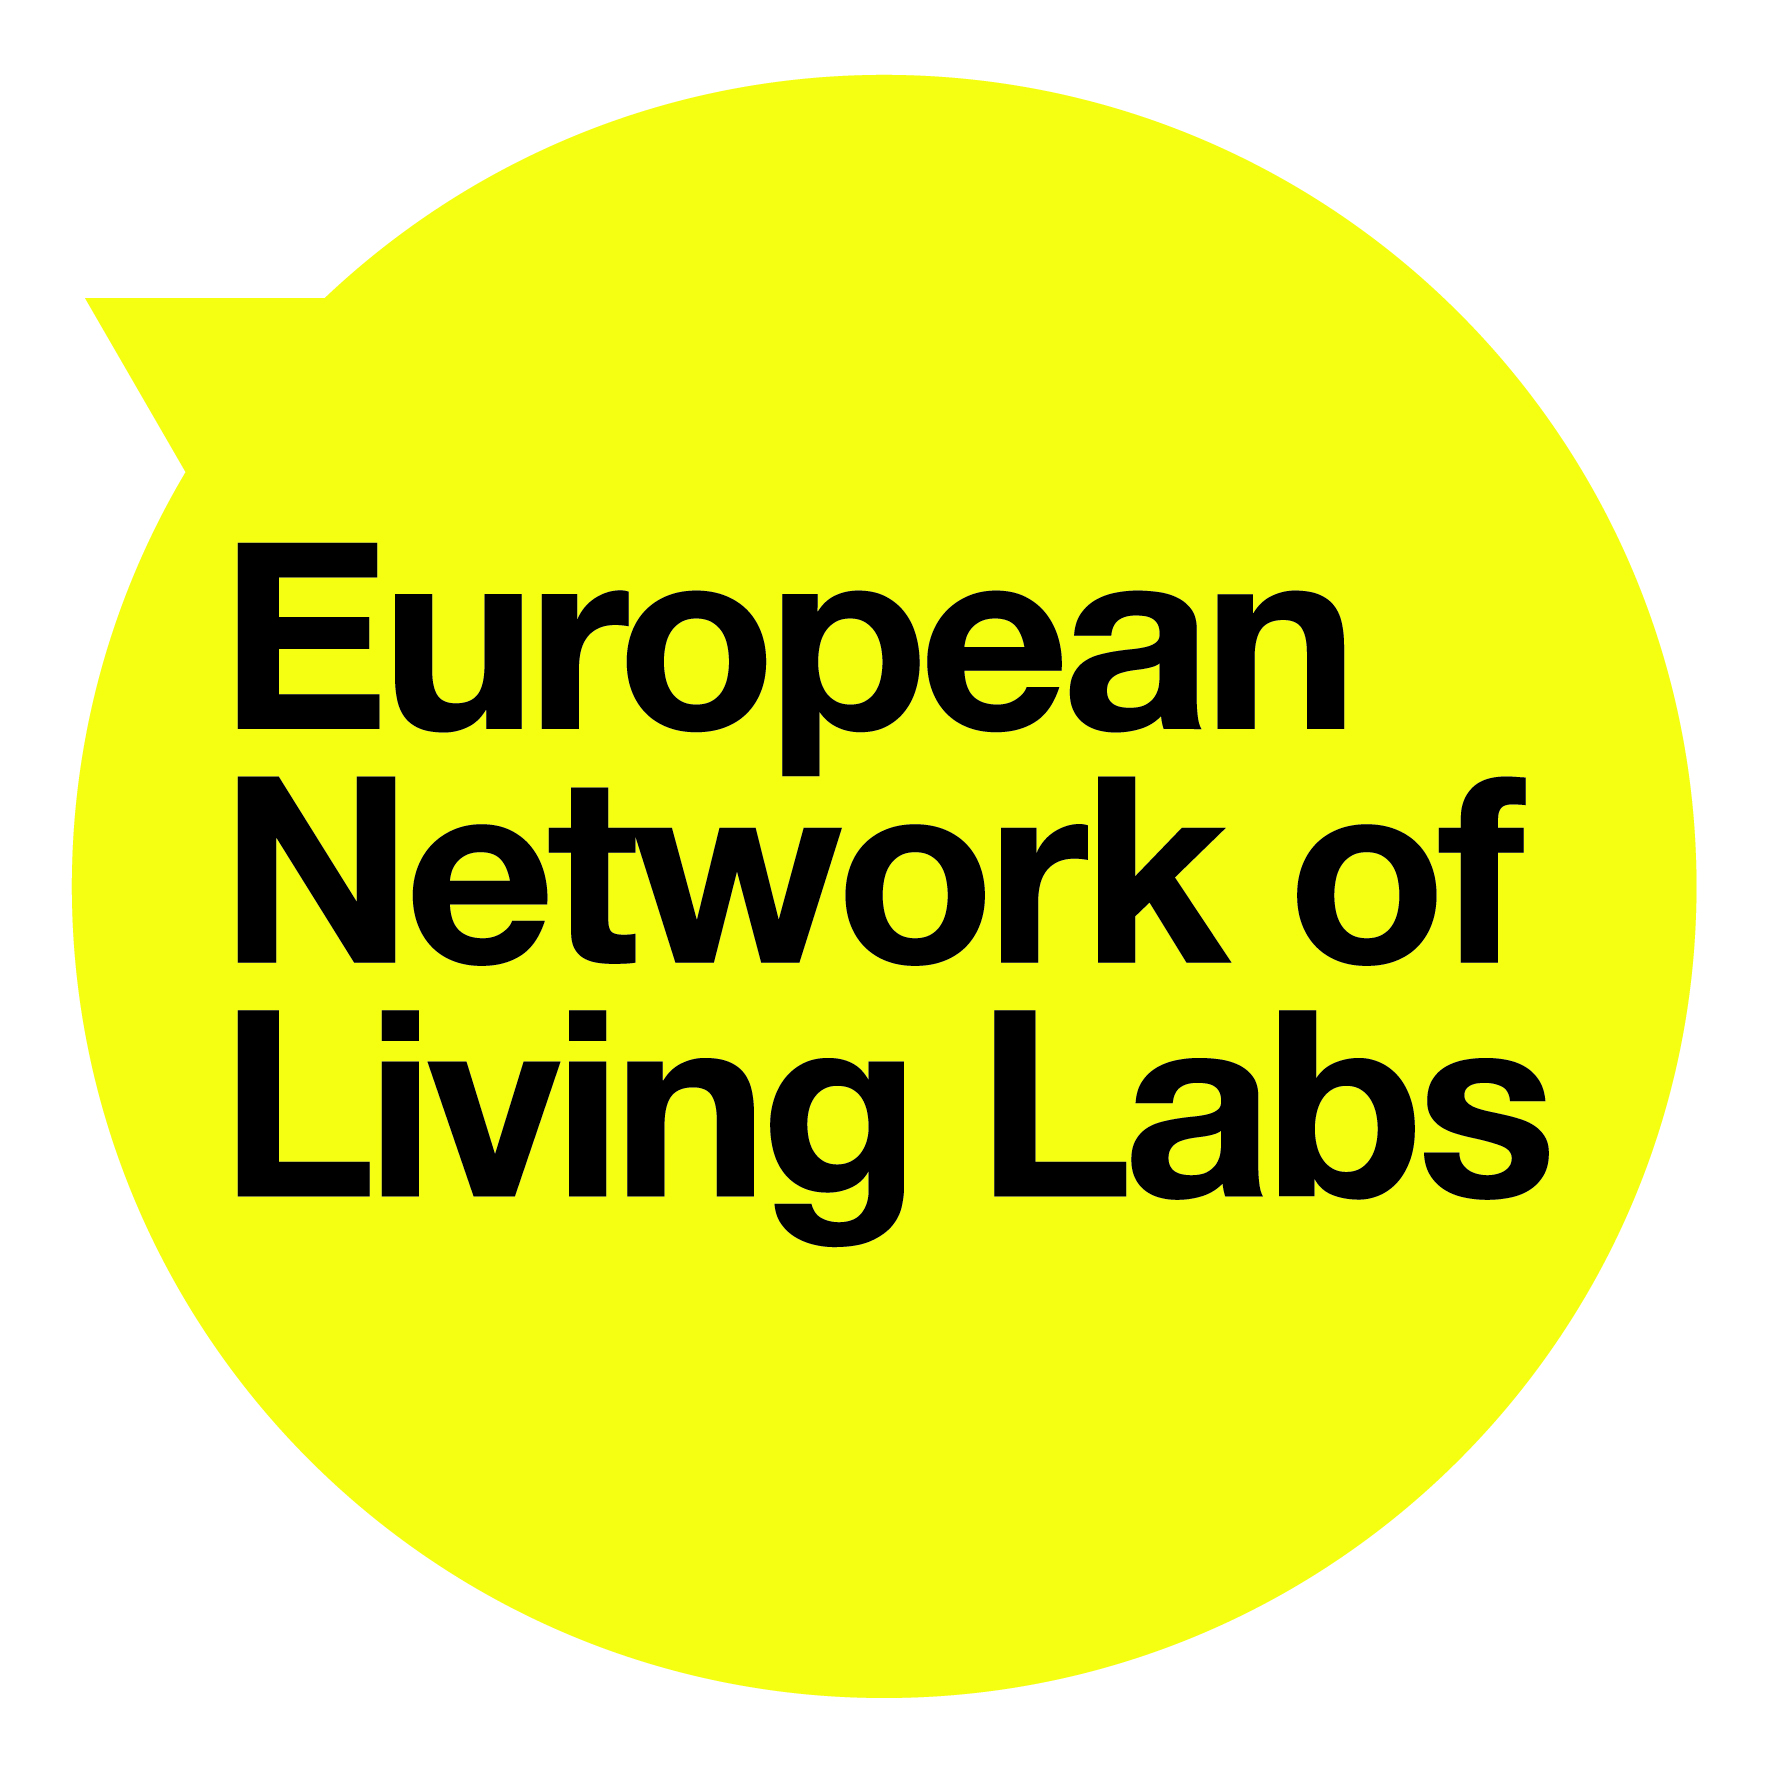 Thess-AHALL joining the European Network of Living Labs (ENOLL)